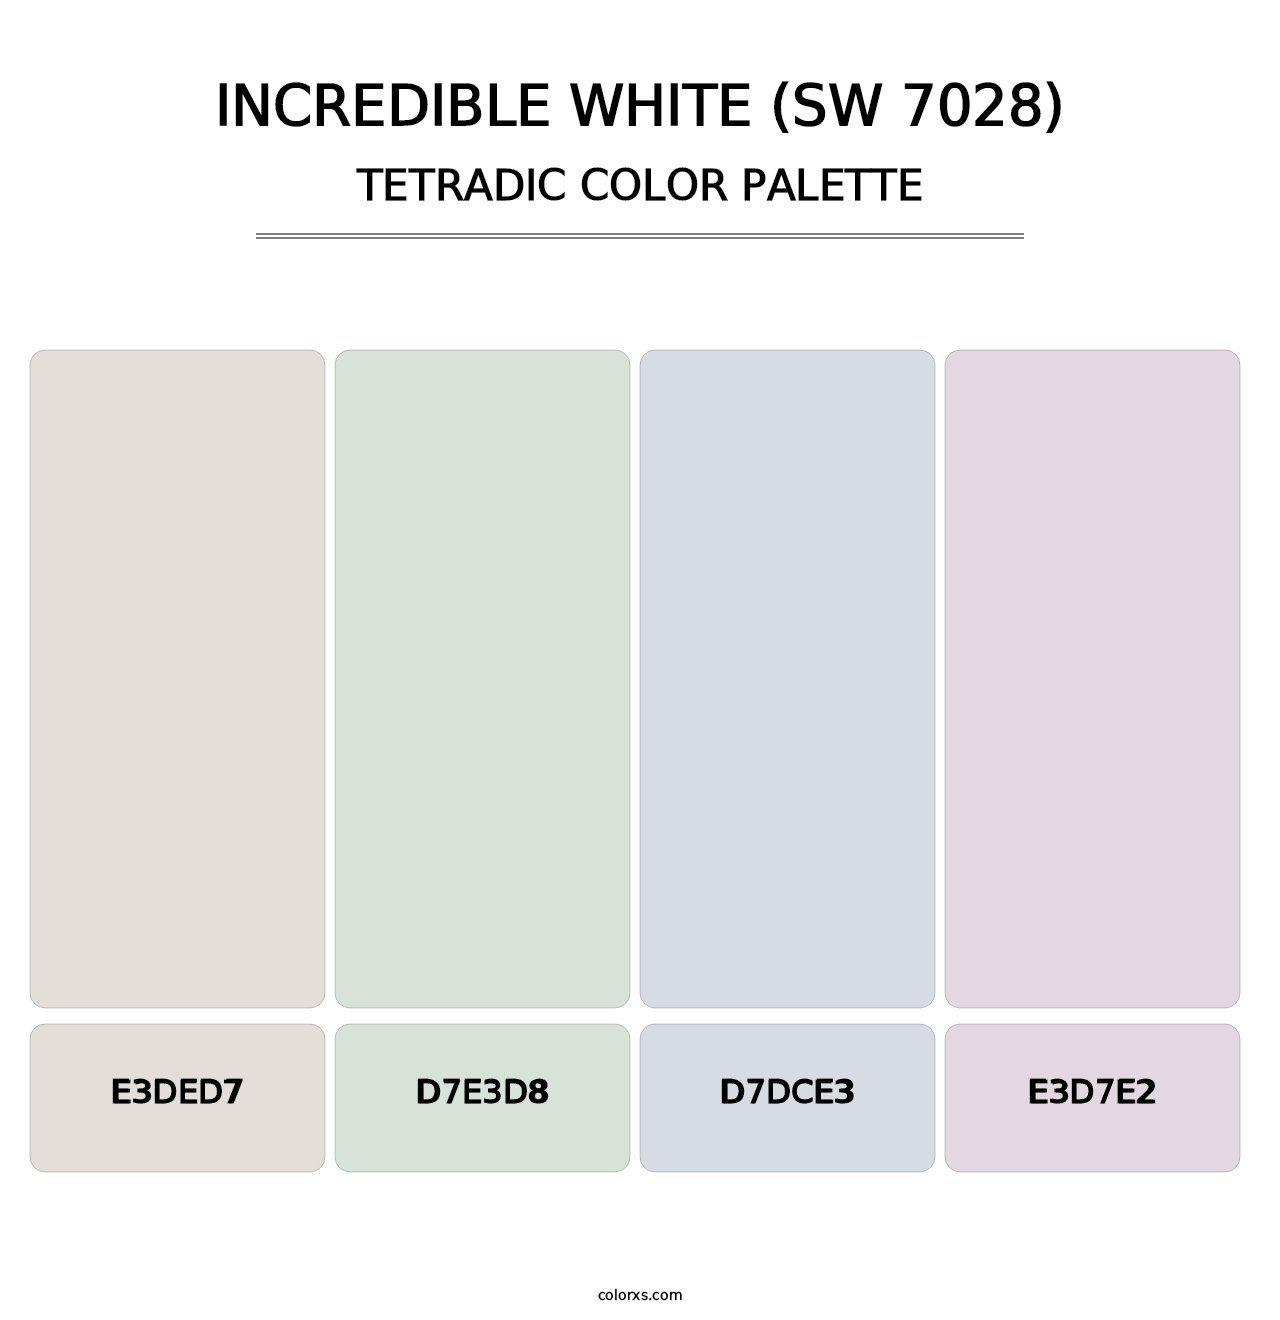 Incredible White (SW 7028) - Tetradic Color Palette